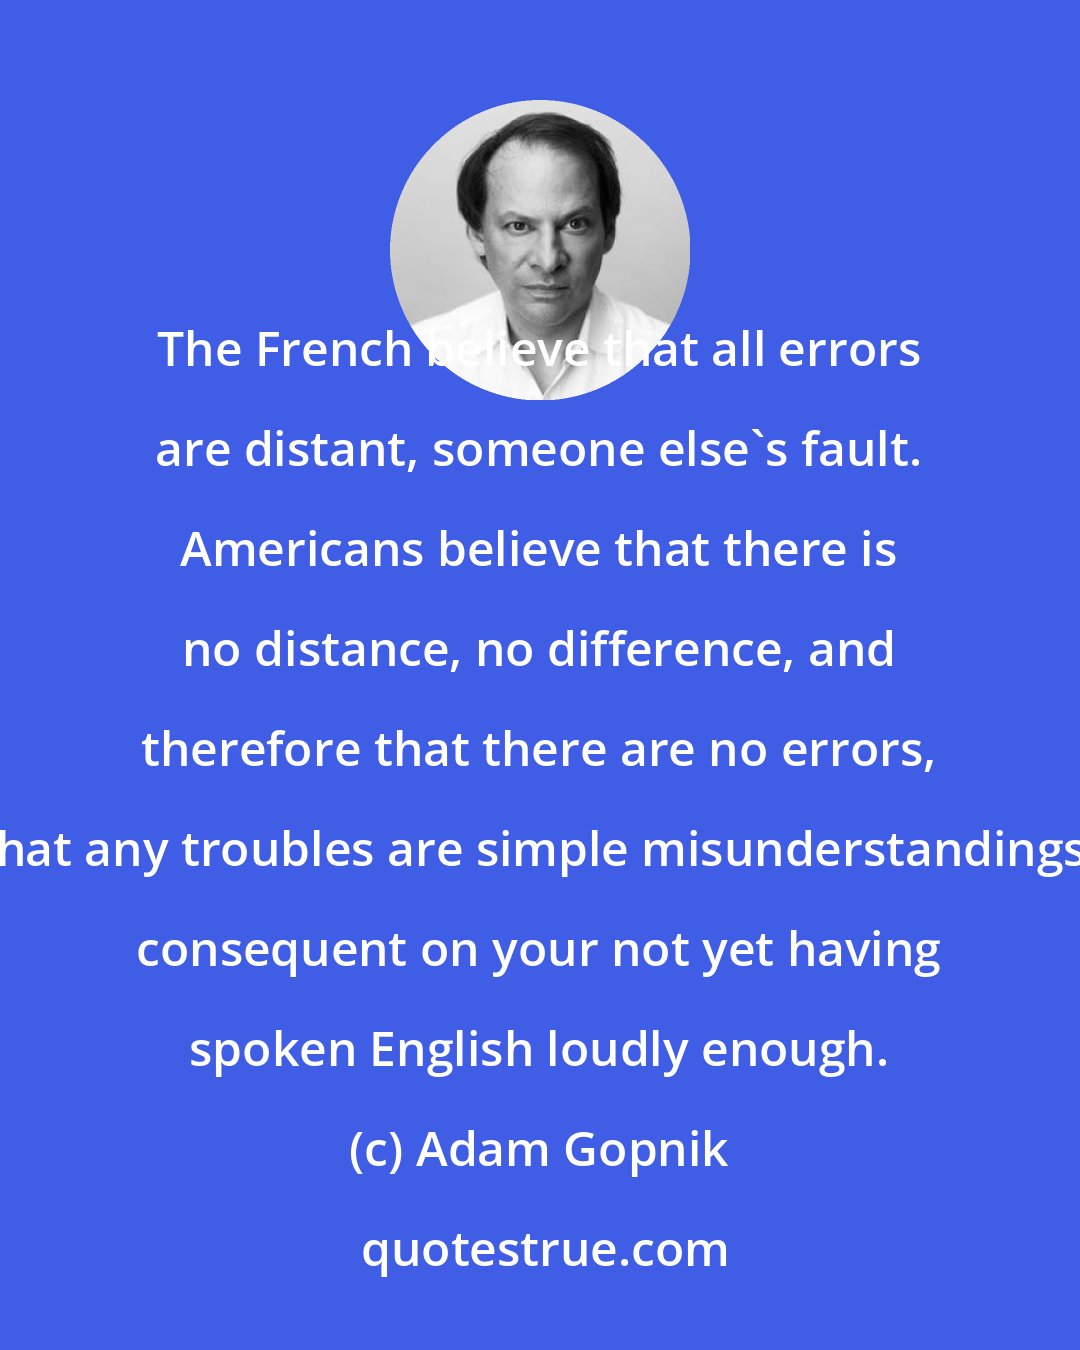 Adam Gopnik: The French believe that all errors are distant, someone else's fault. Americans believe that there is no distance, no difference, and therefore that there are no errors, that any troubles are simple misunderstandings, consequent on your not yet having spoken English loudly enough.